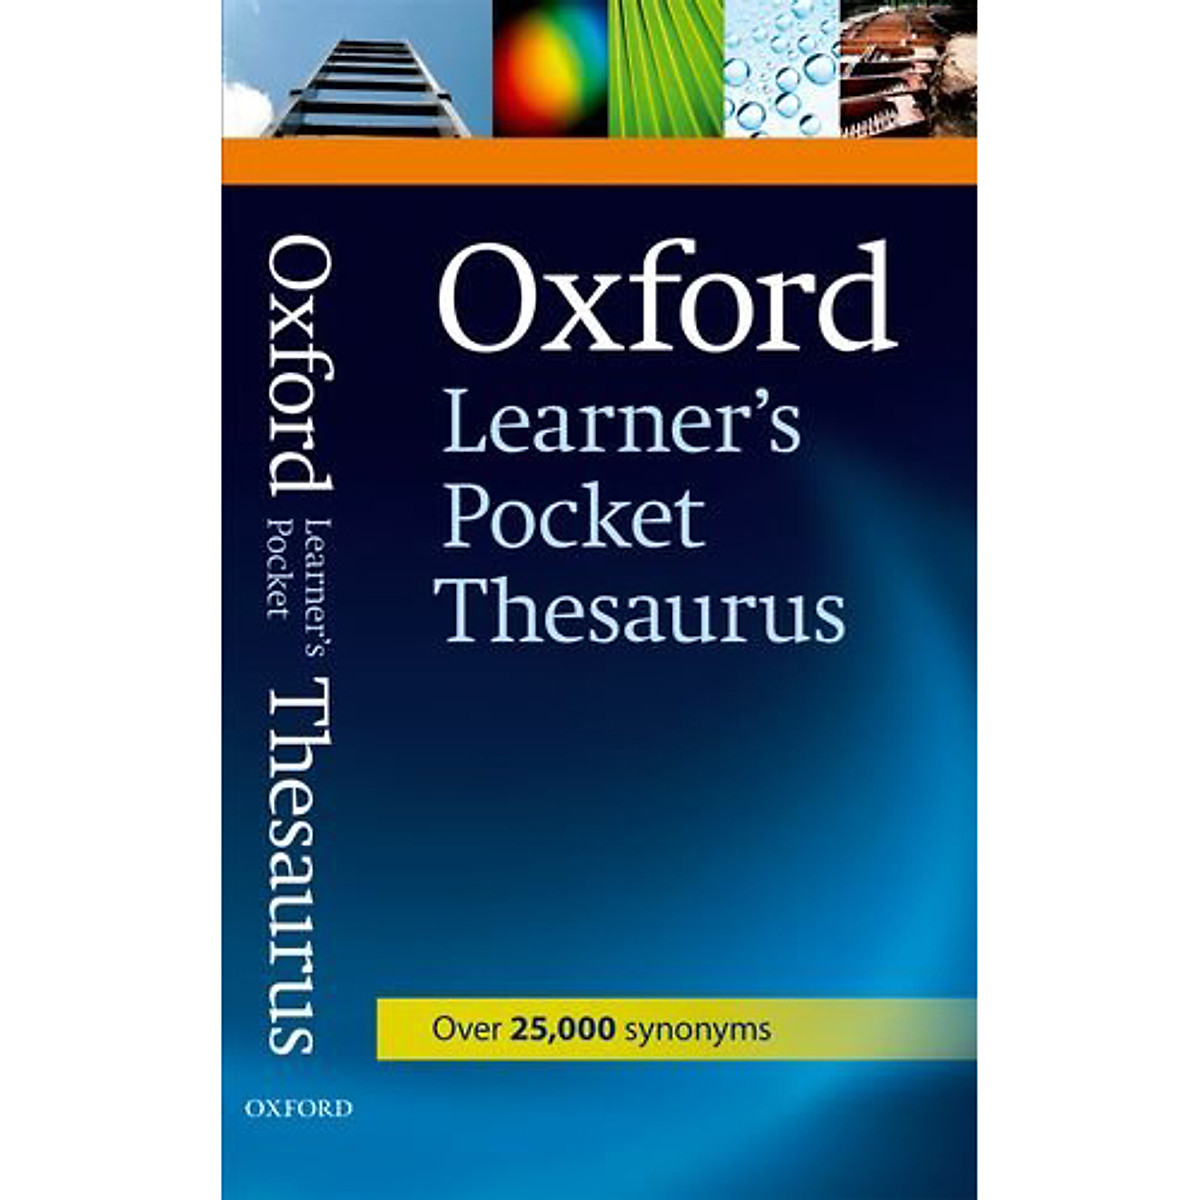 Oxford Learner 's Pocket Thesaurus : A Compact Dictionary of Synonyms and Opposites